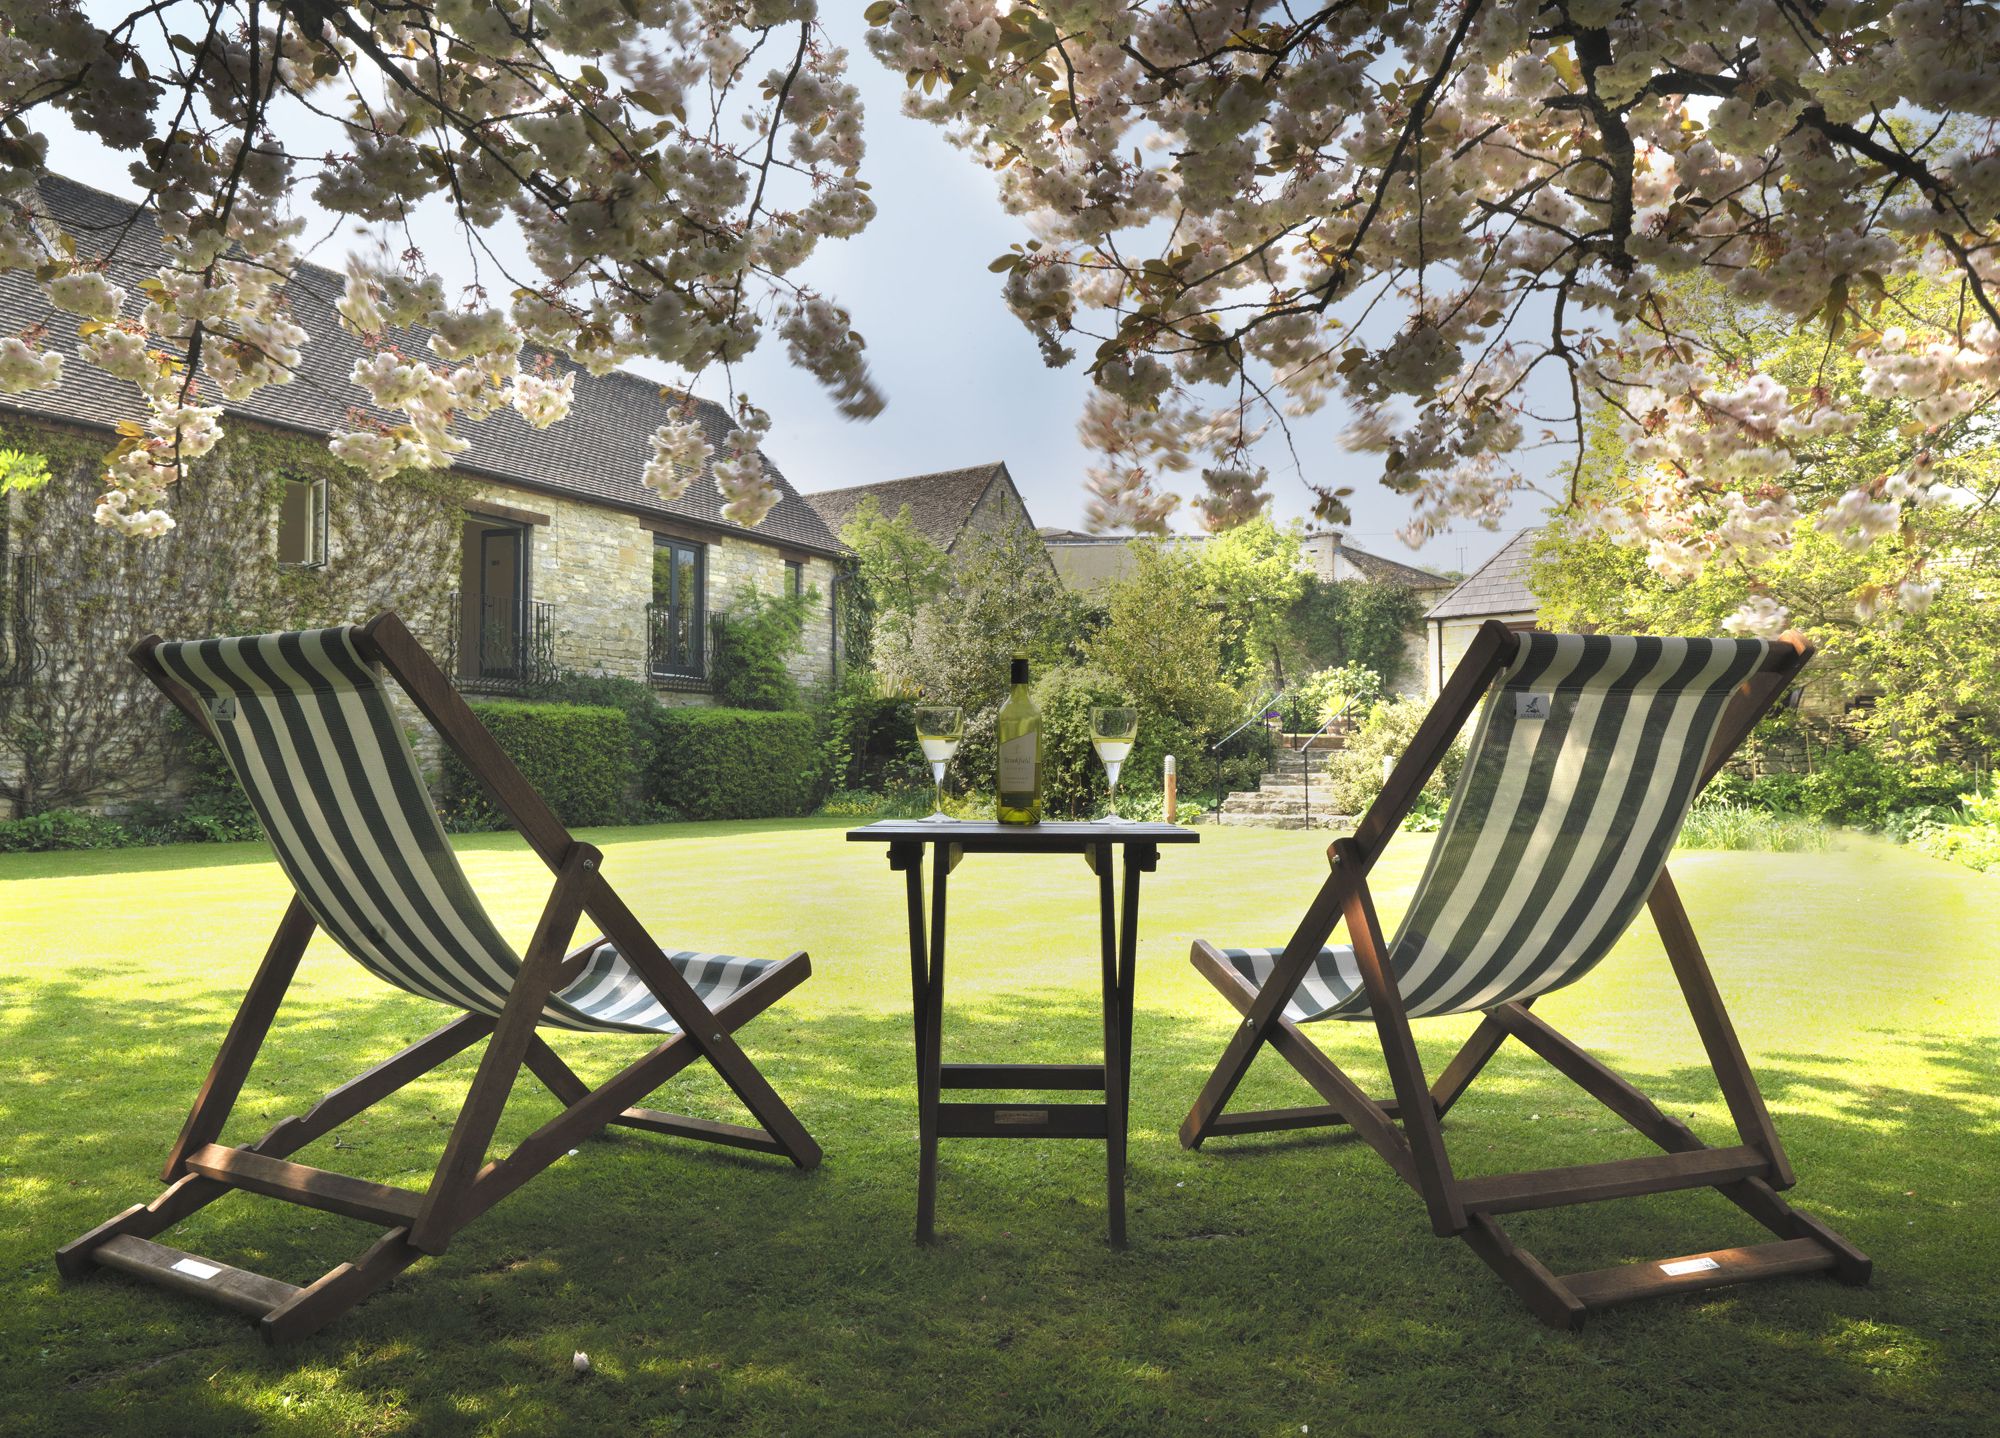 Hotels, Cottages, B&Bs & Glamping in The Cotswolds